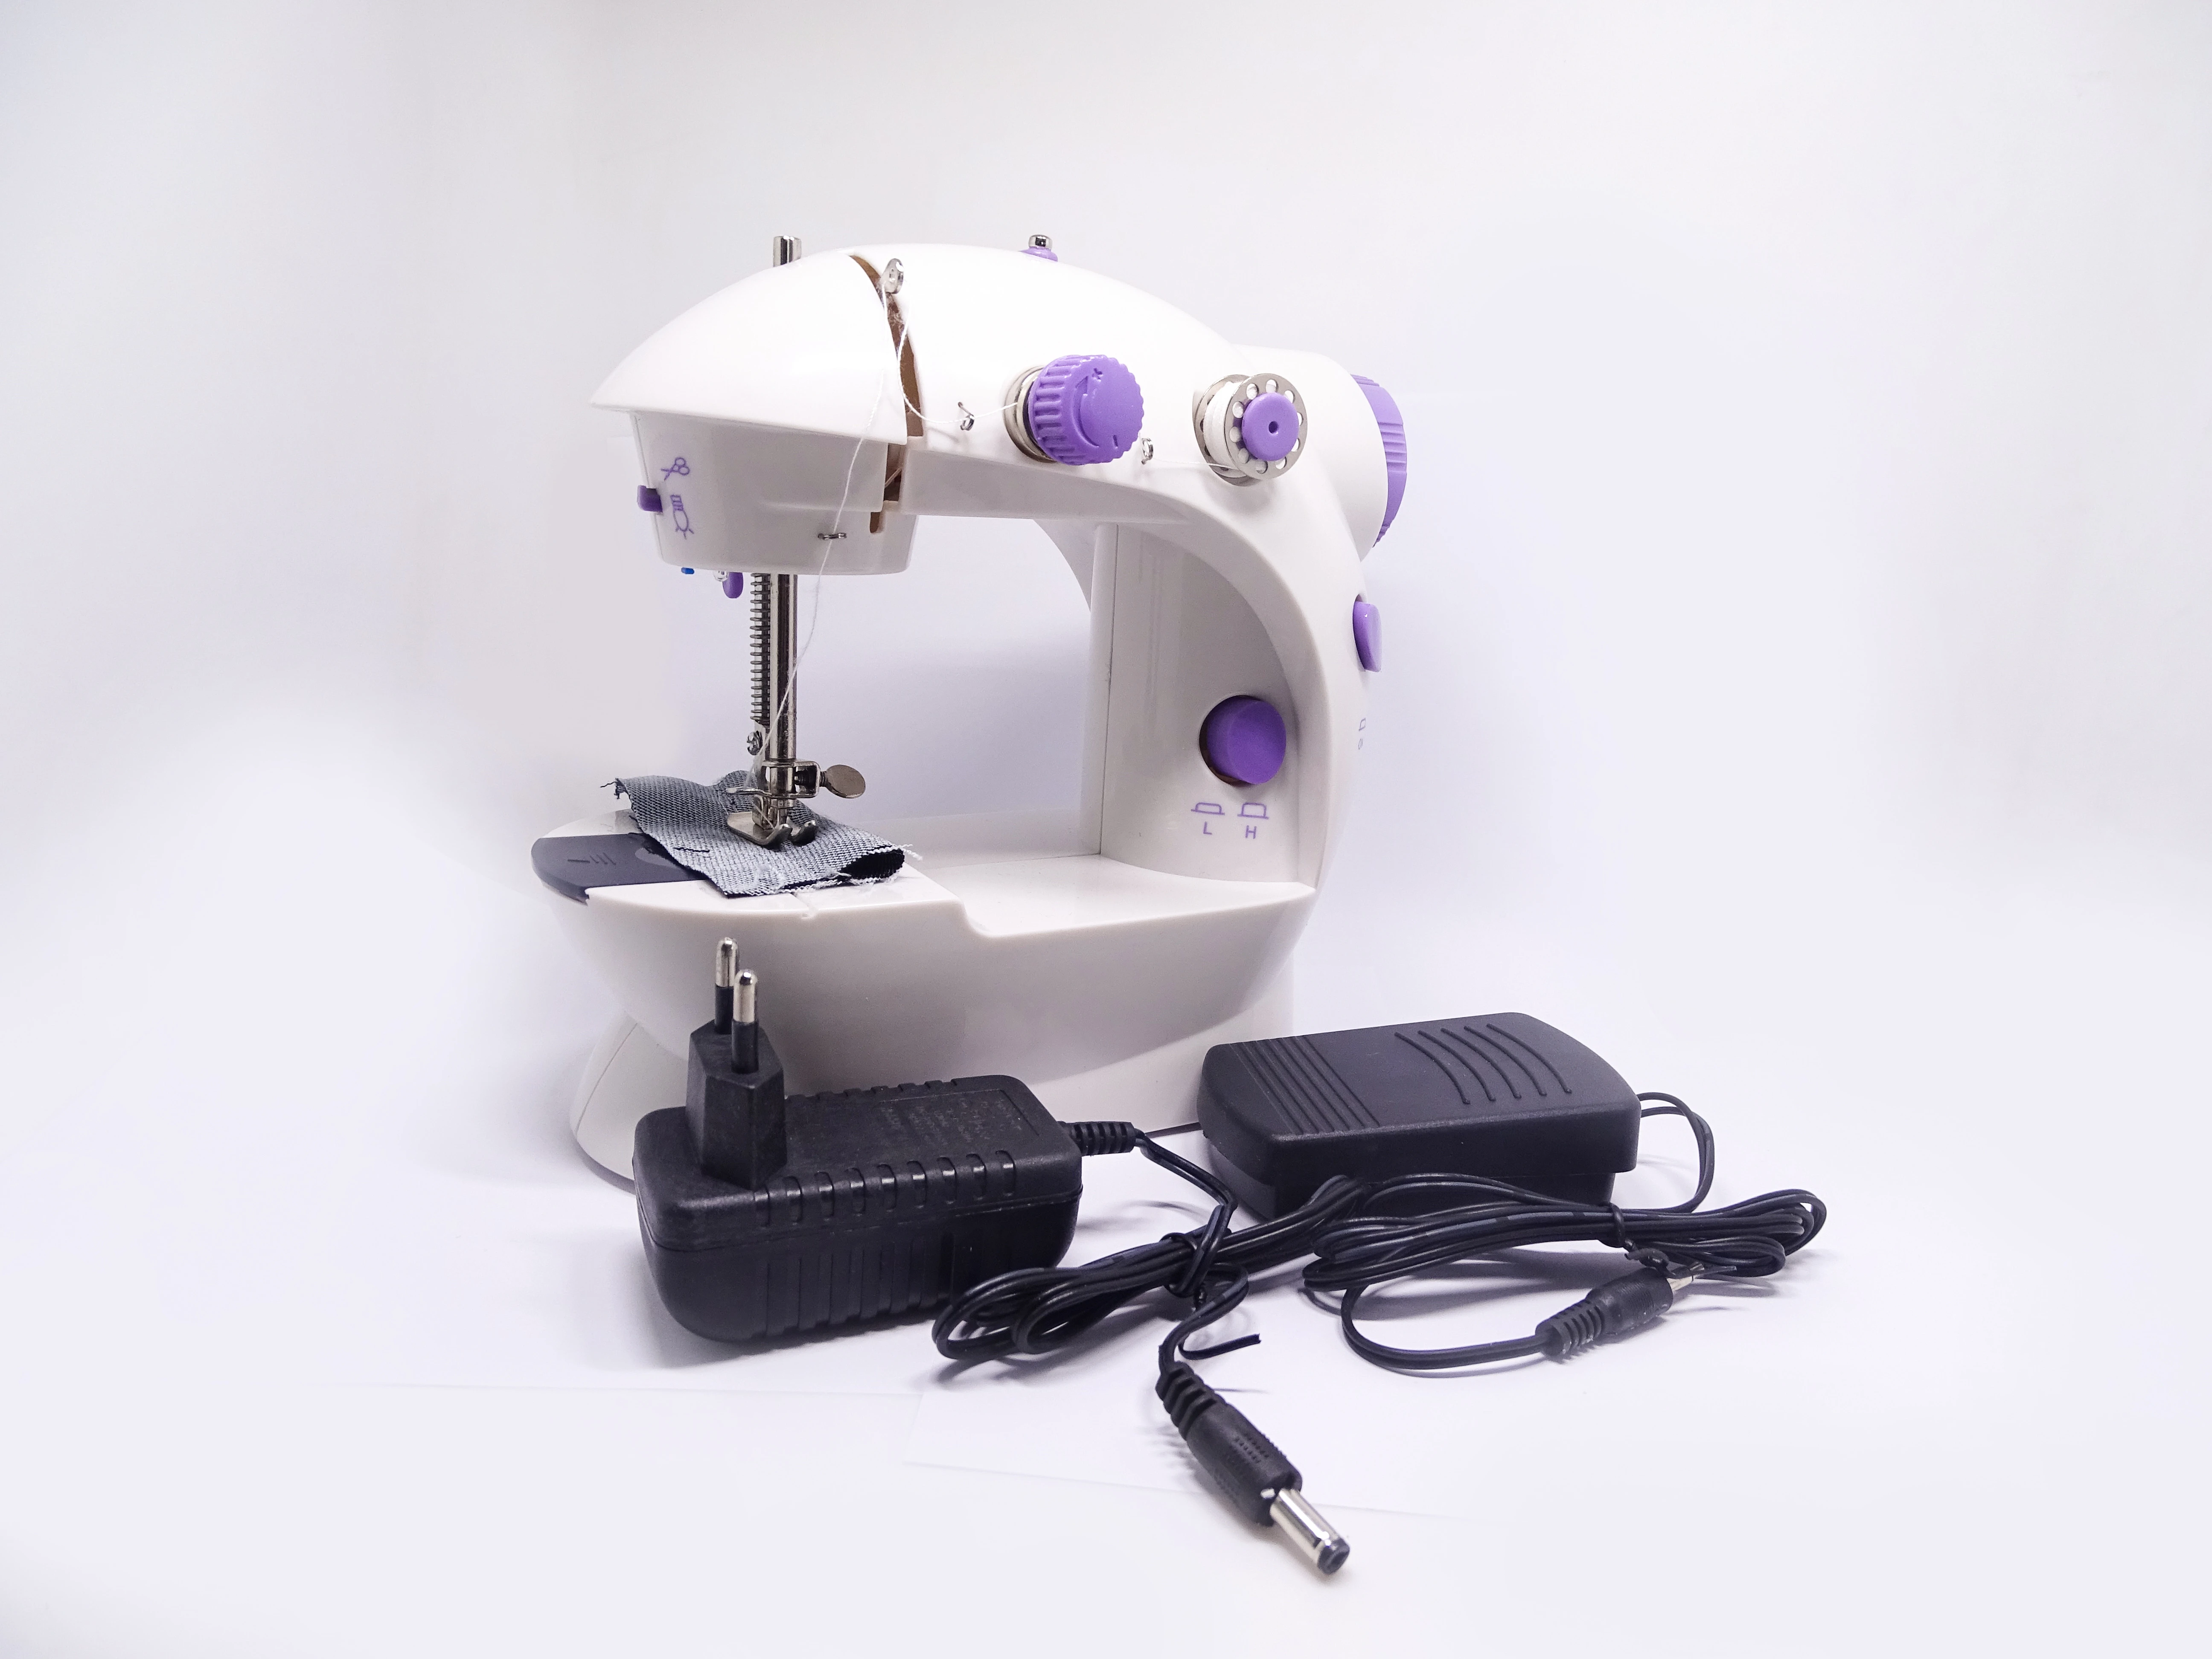 Sewing buttonhole and button automatic thread rewind separately sewing machine foot set